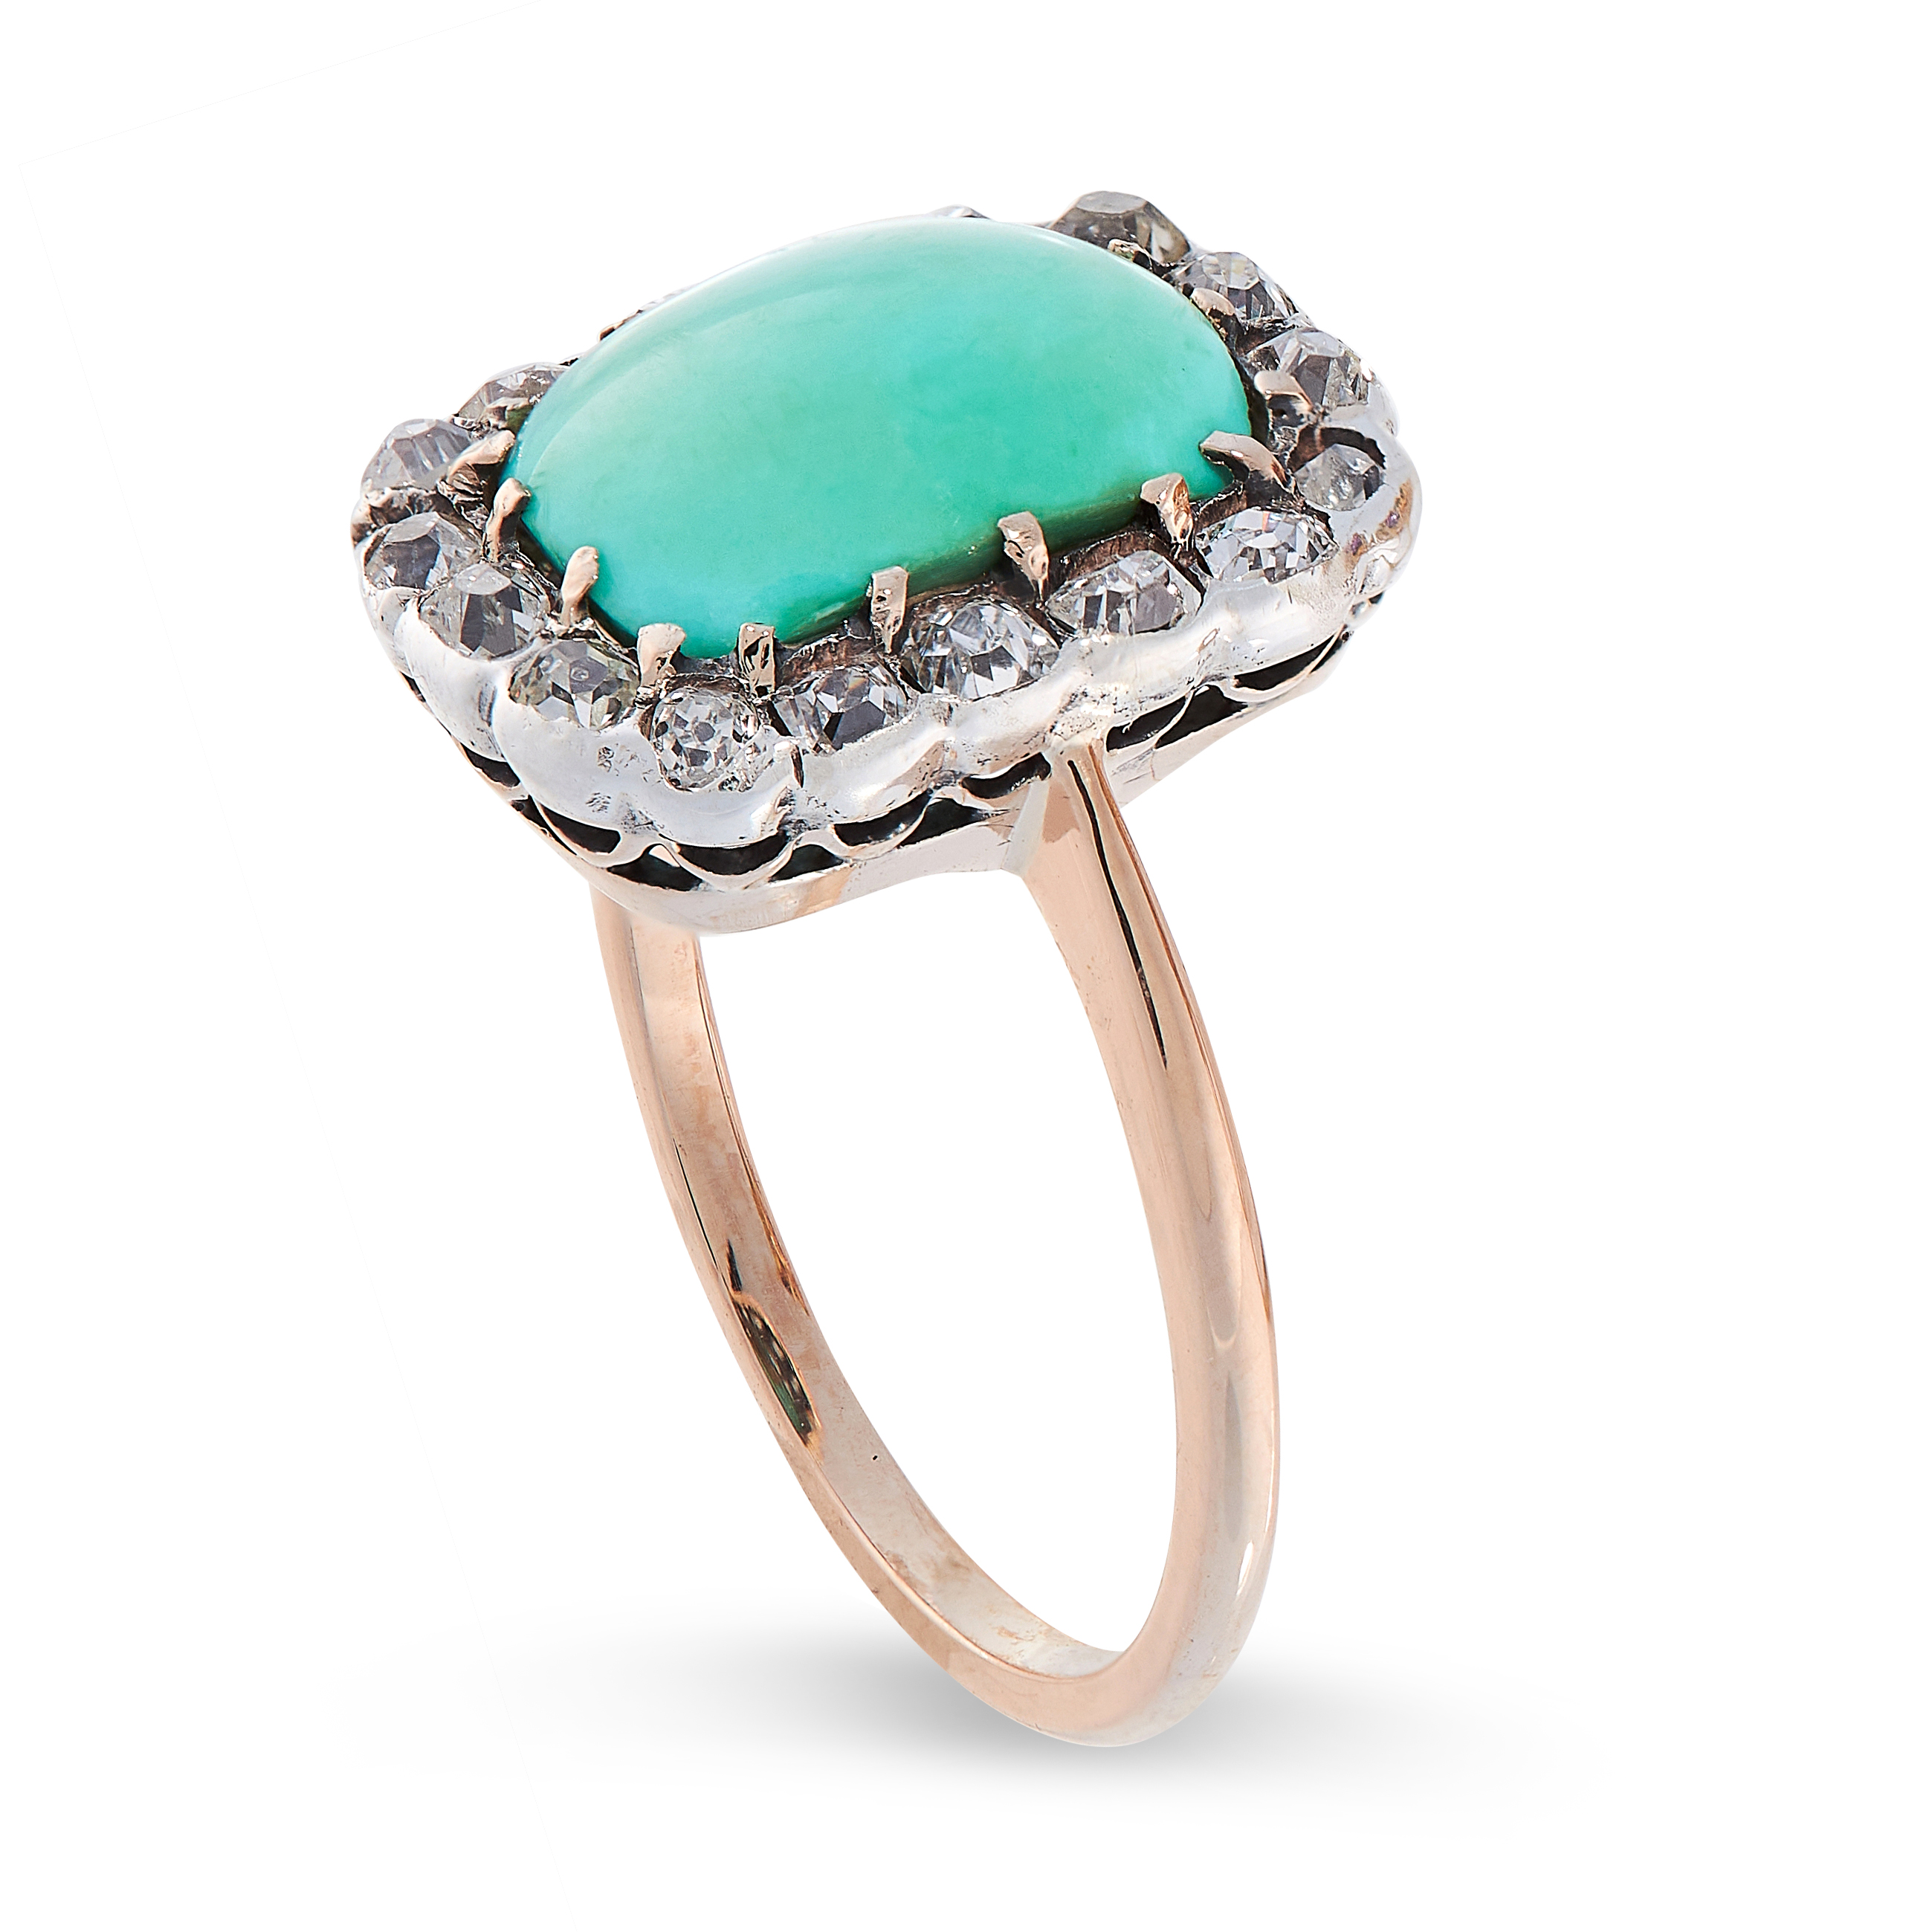 ANTIQUE TURQUOISE AND DIAMOND RING, EARLY 20TH CENTURY claw-set with a cabochon turquoise, within - Image 2 of 2